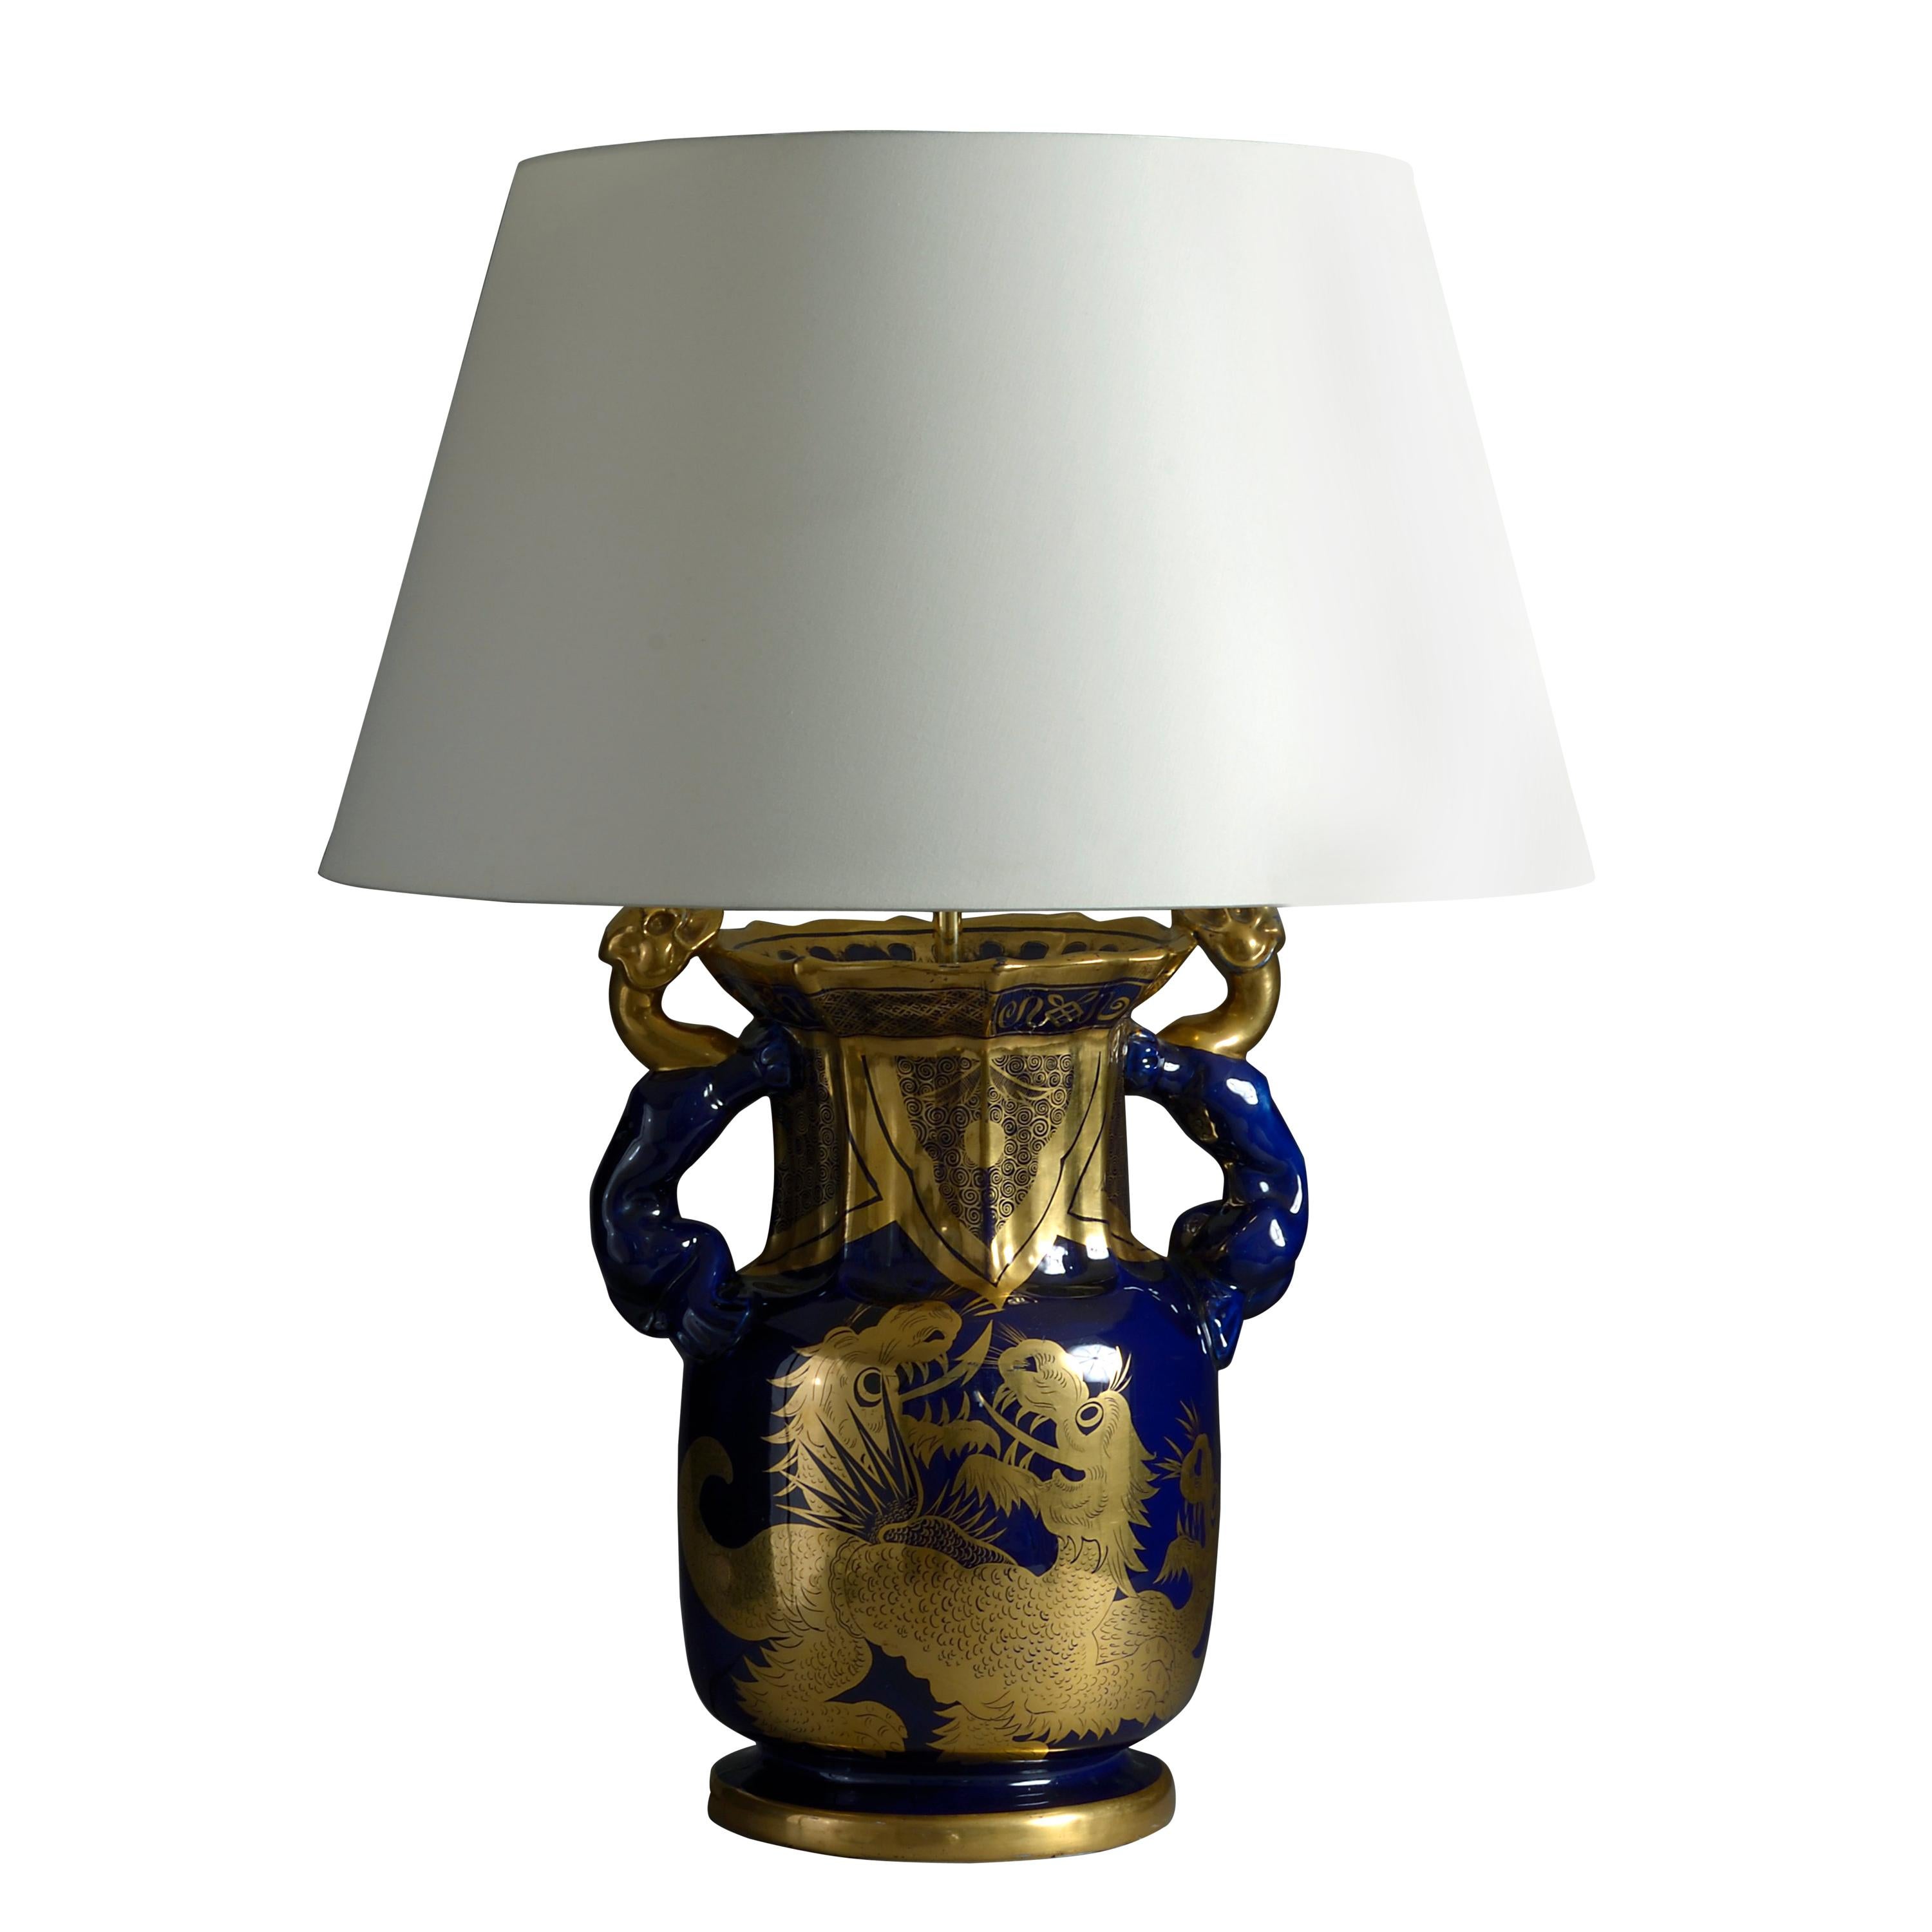 Early 19th Century Blue and Gold Mason’s Ironstone Vase Lamp